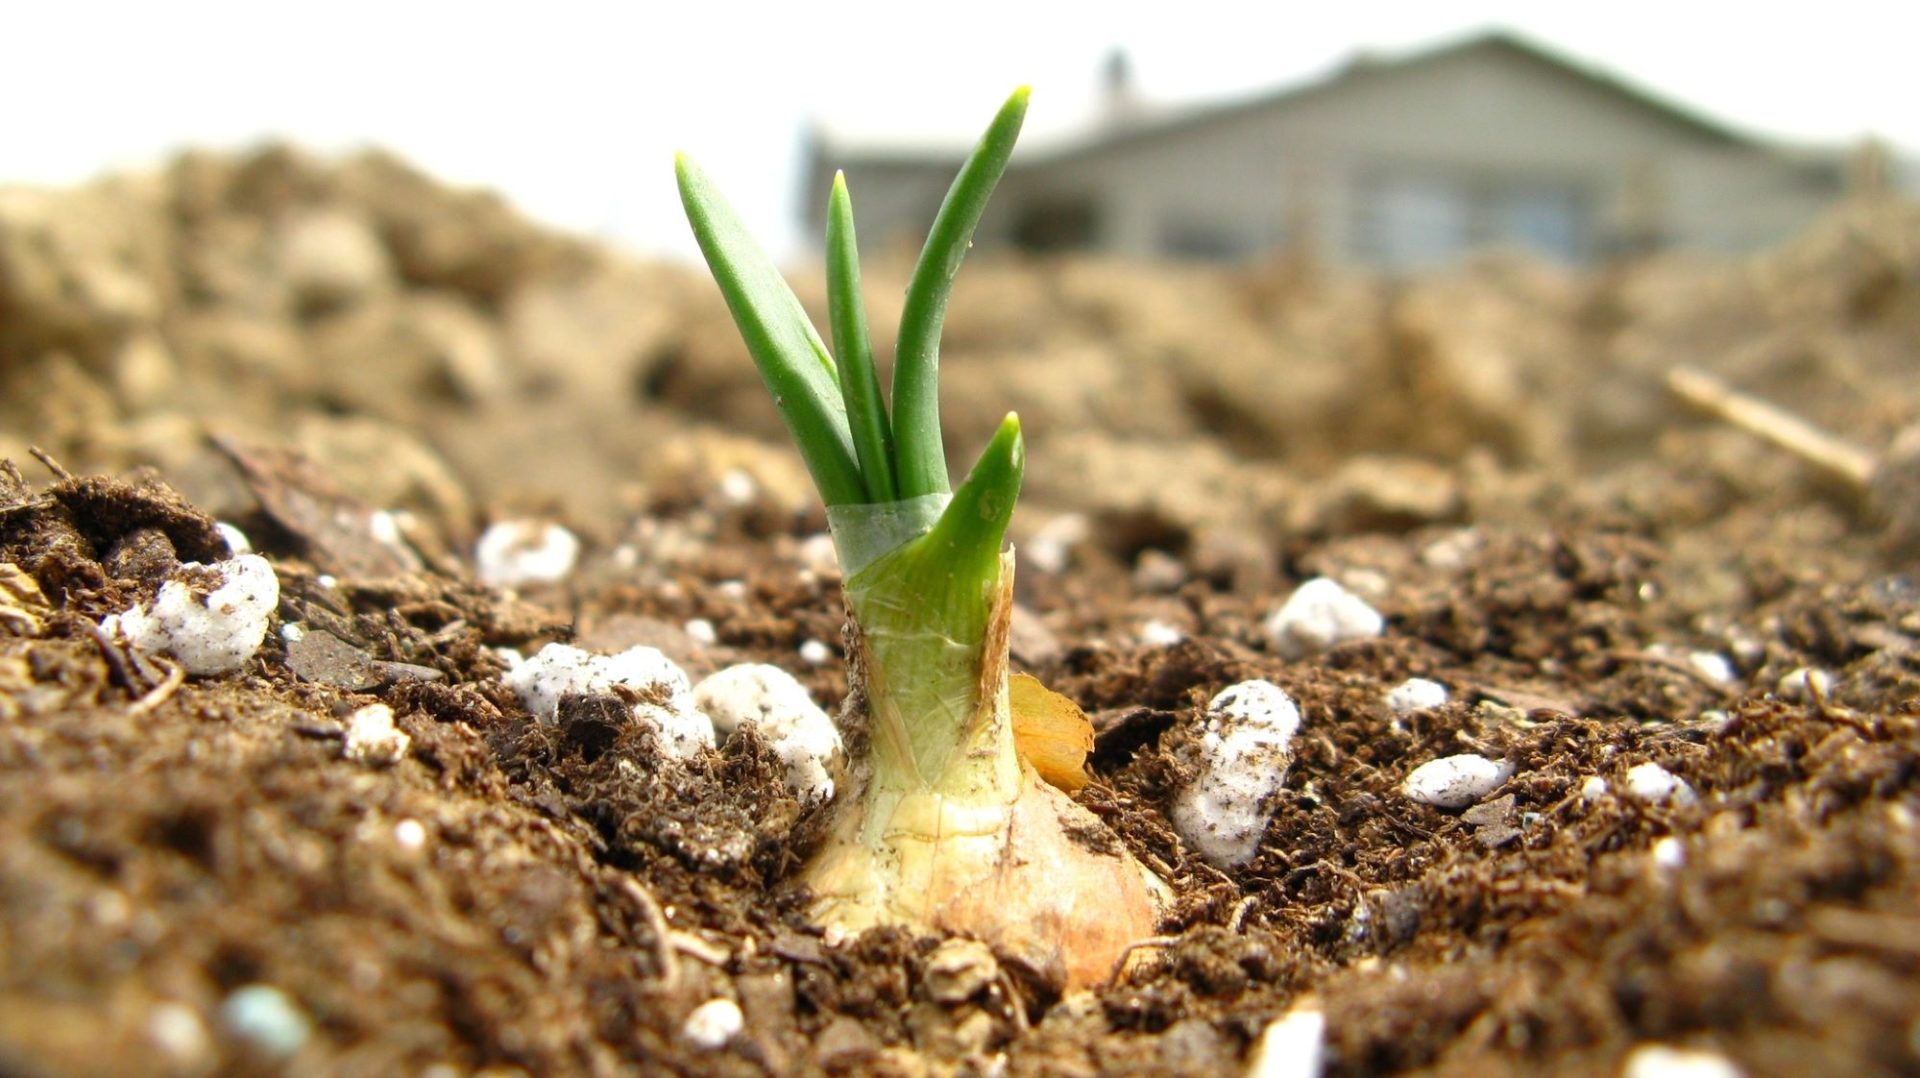 A close up of an onion peeking out of the dirt.